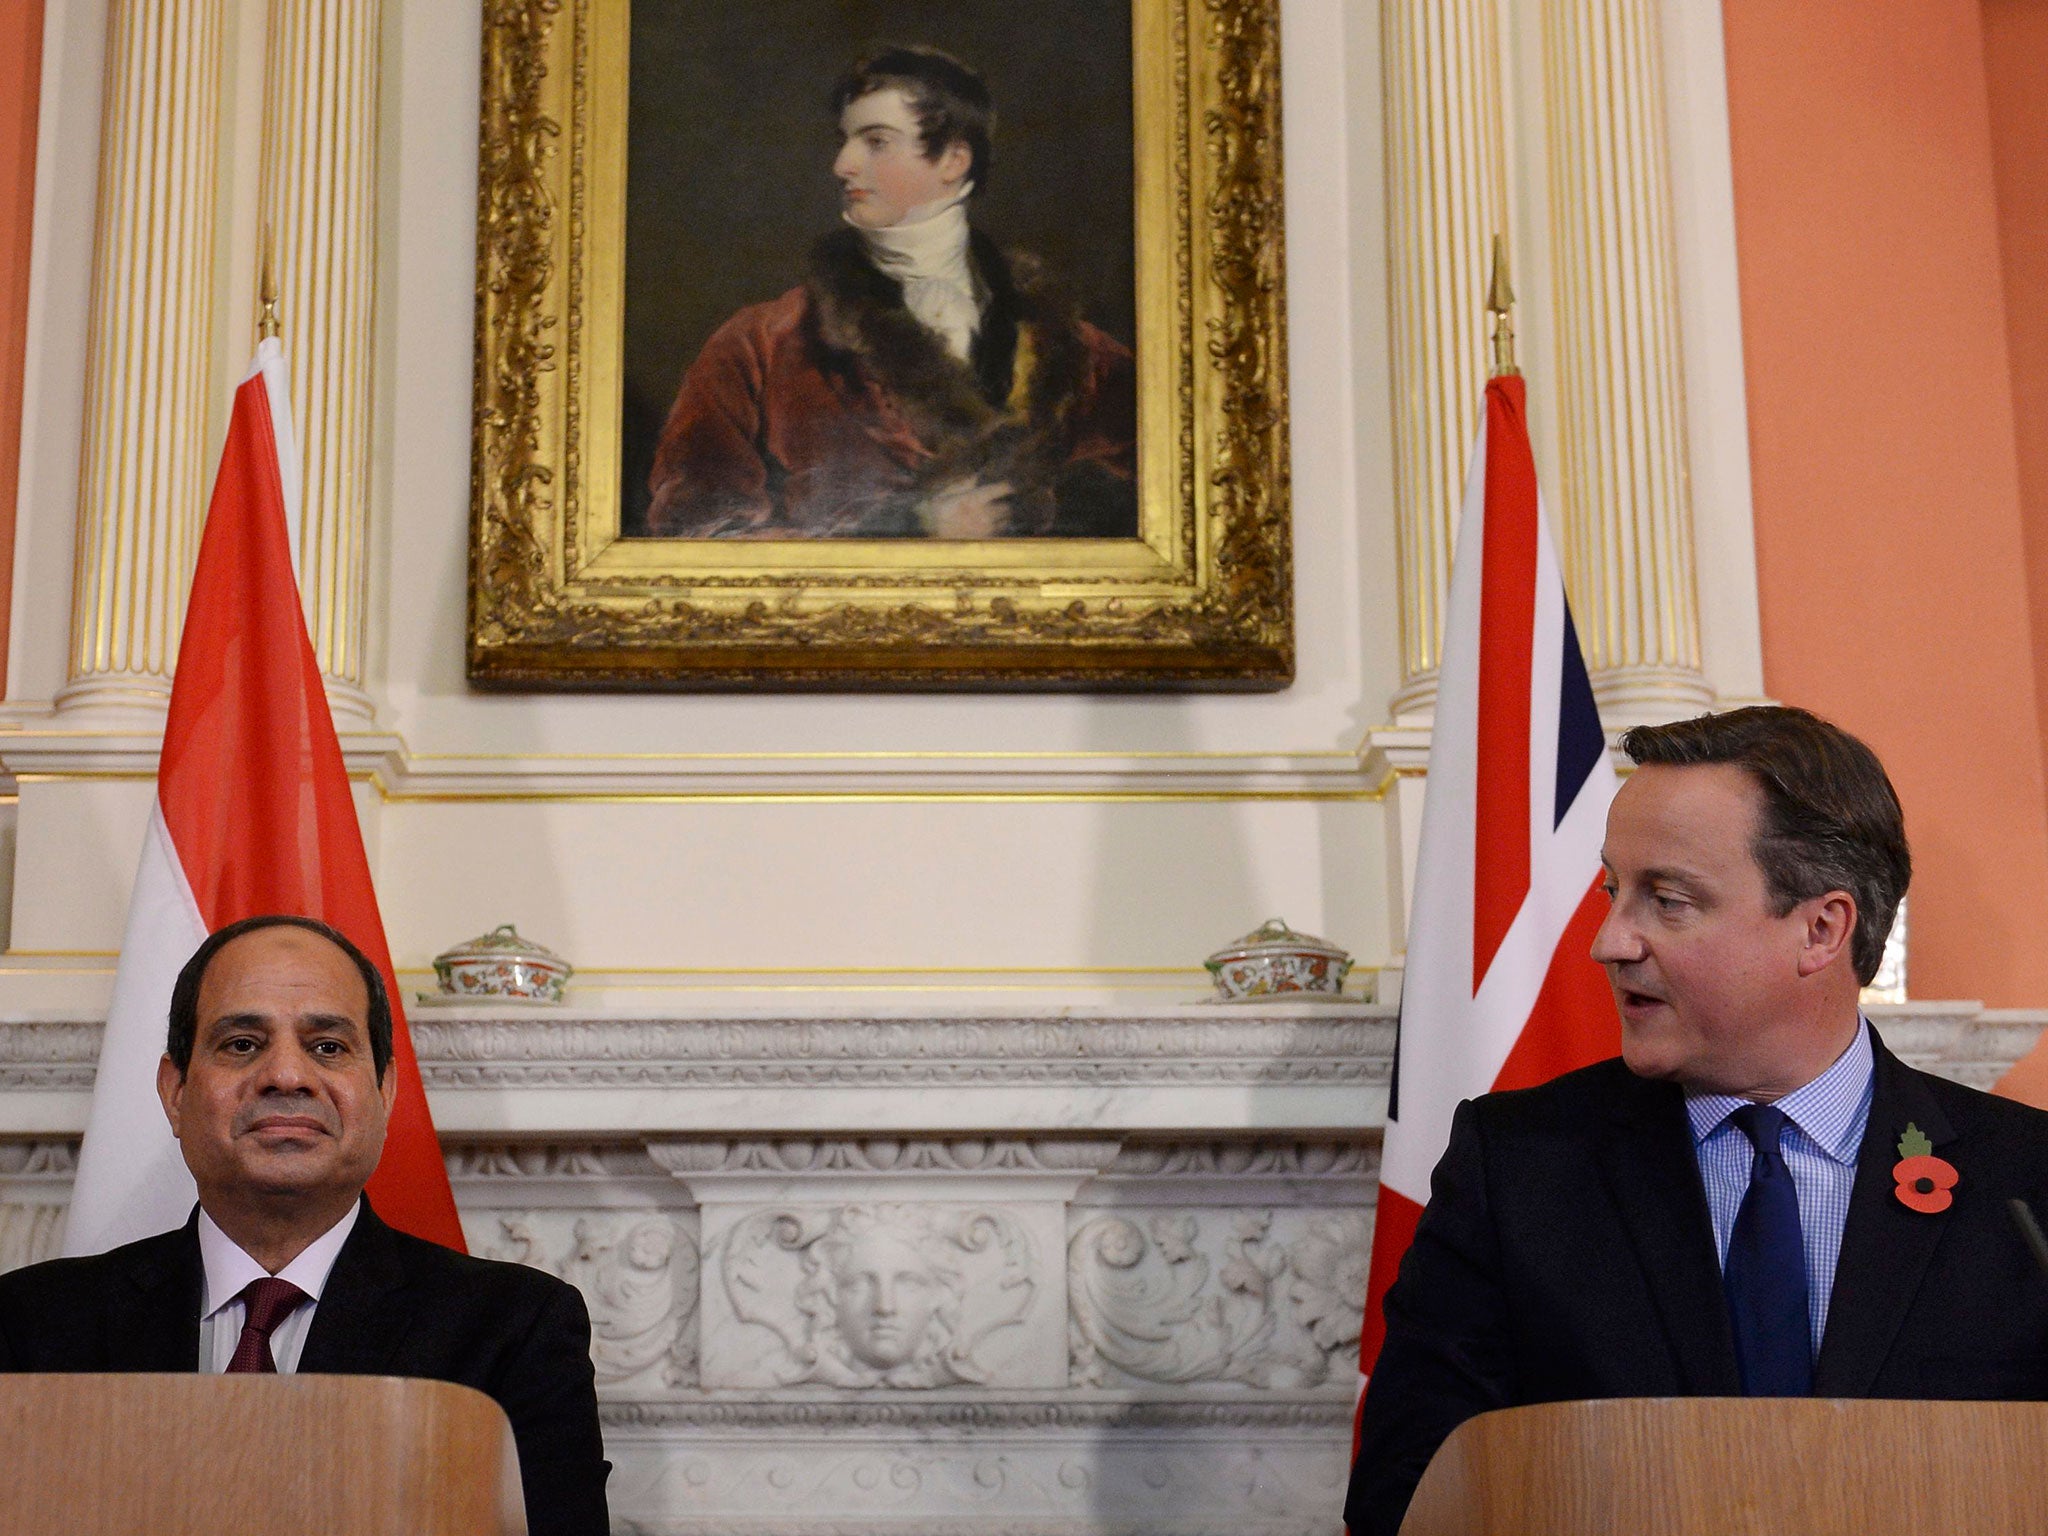 Britain's Prime Minister David Cameron, right, speaks during a news conference with Egypt's President Abdel Fattah al-Sisi at 10 Downing Street